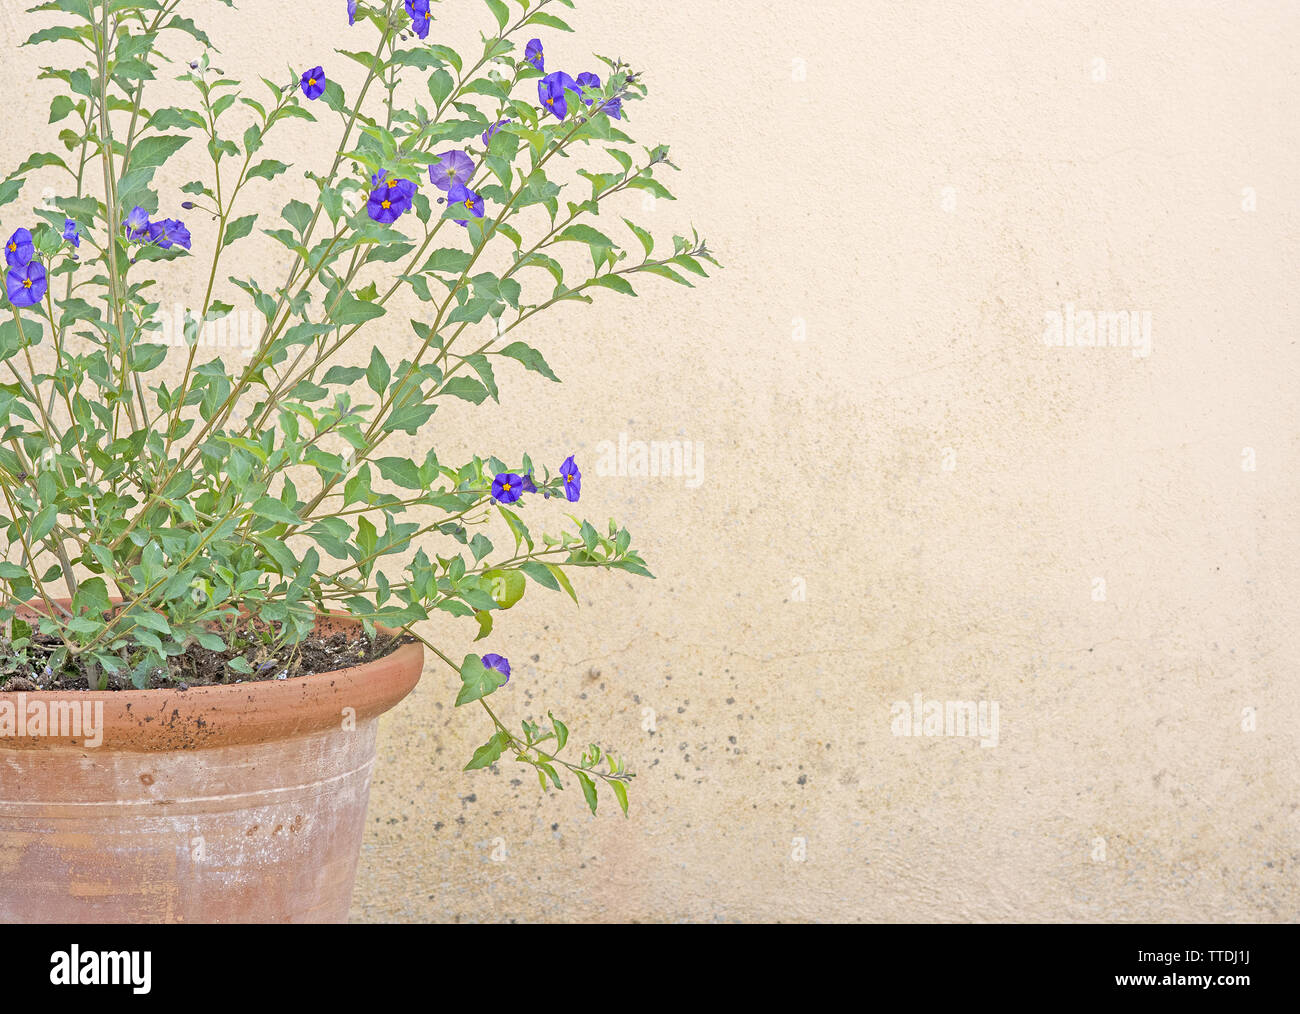 Purple yellow lyciantes flower on branches with green leaves in terracotta pot background copy space. Stock Photo